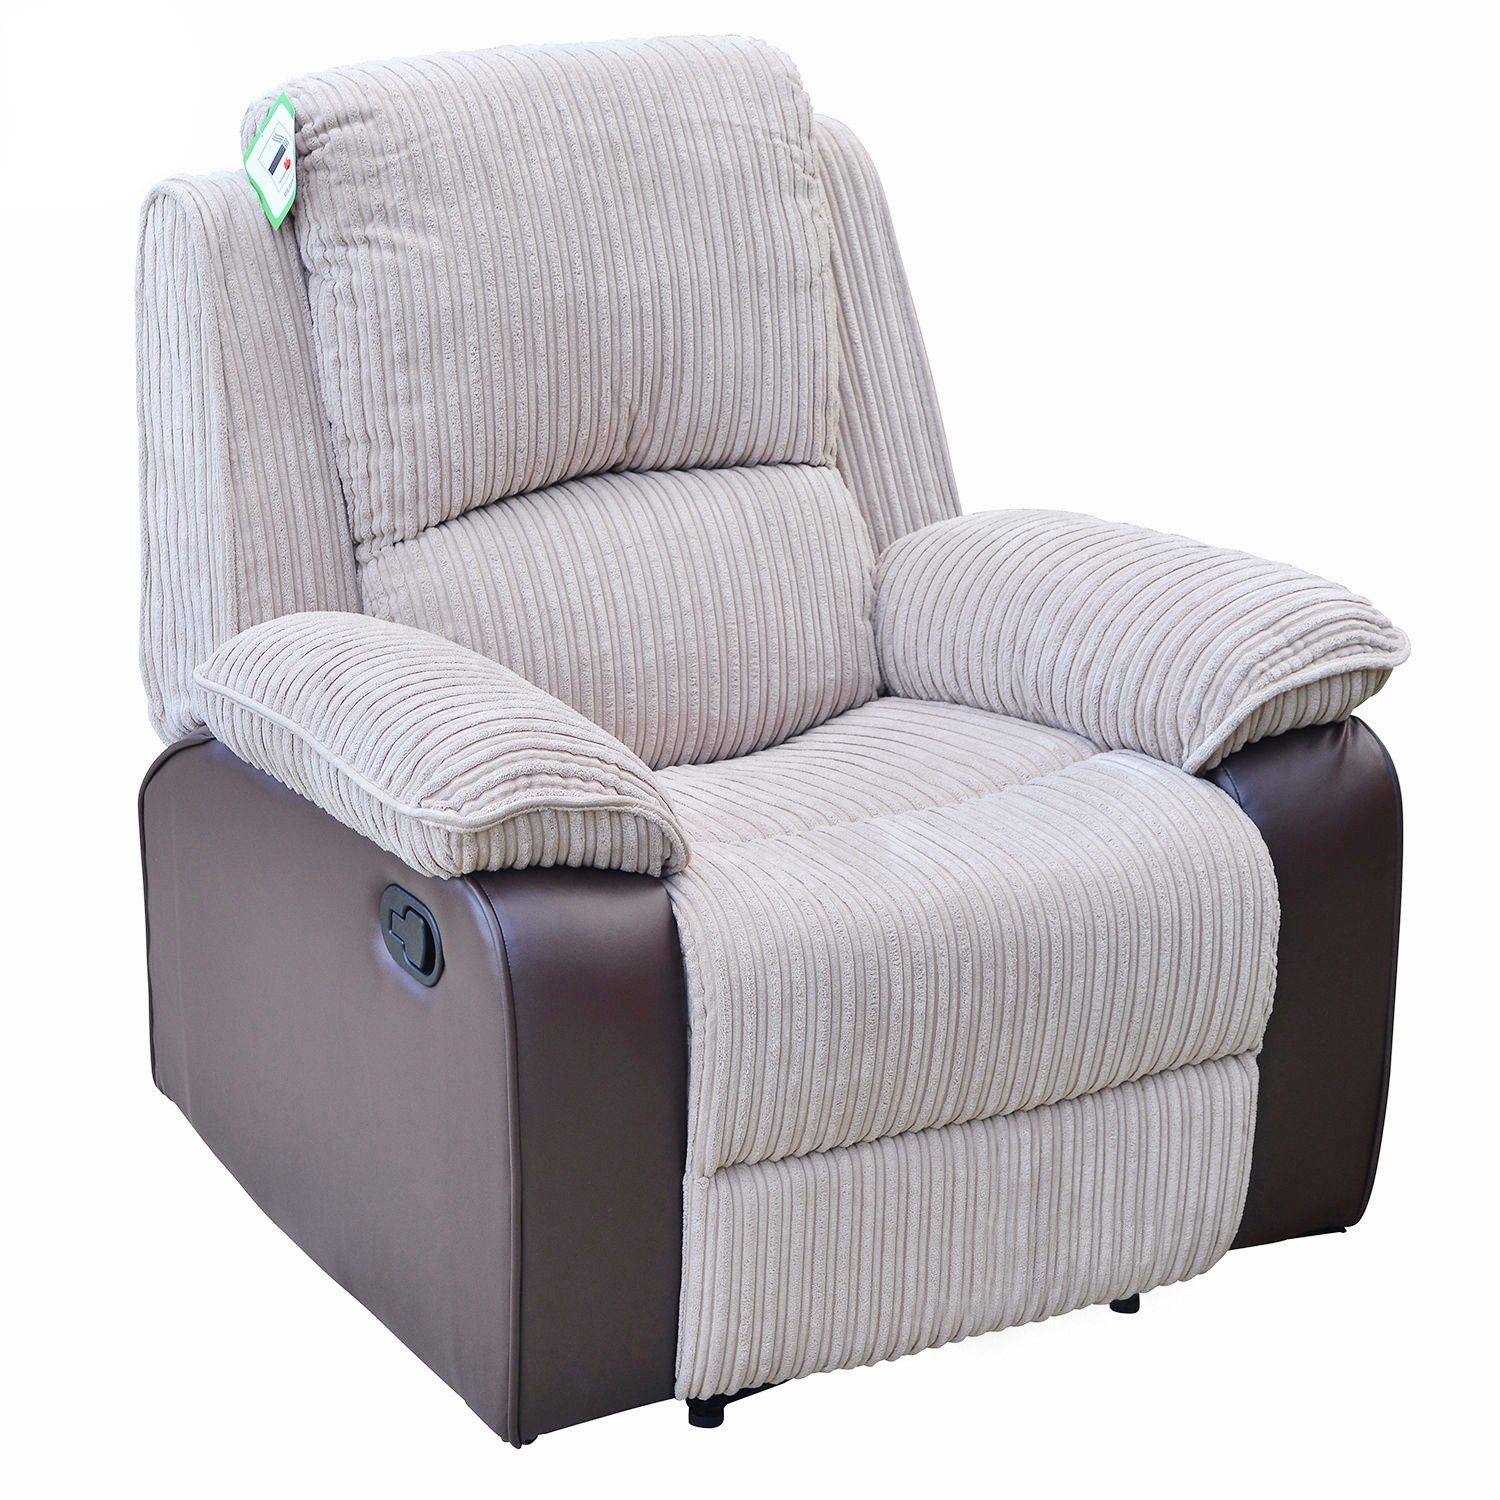 Fabric Recliner Sofa Featured Image